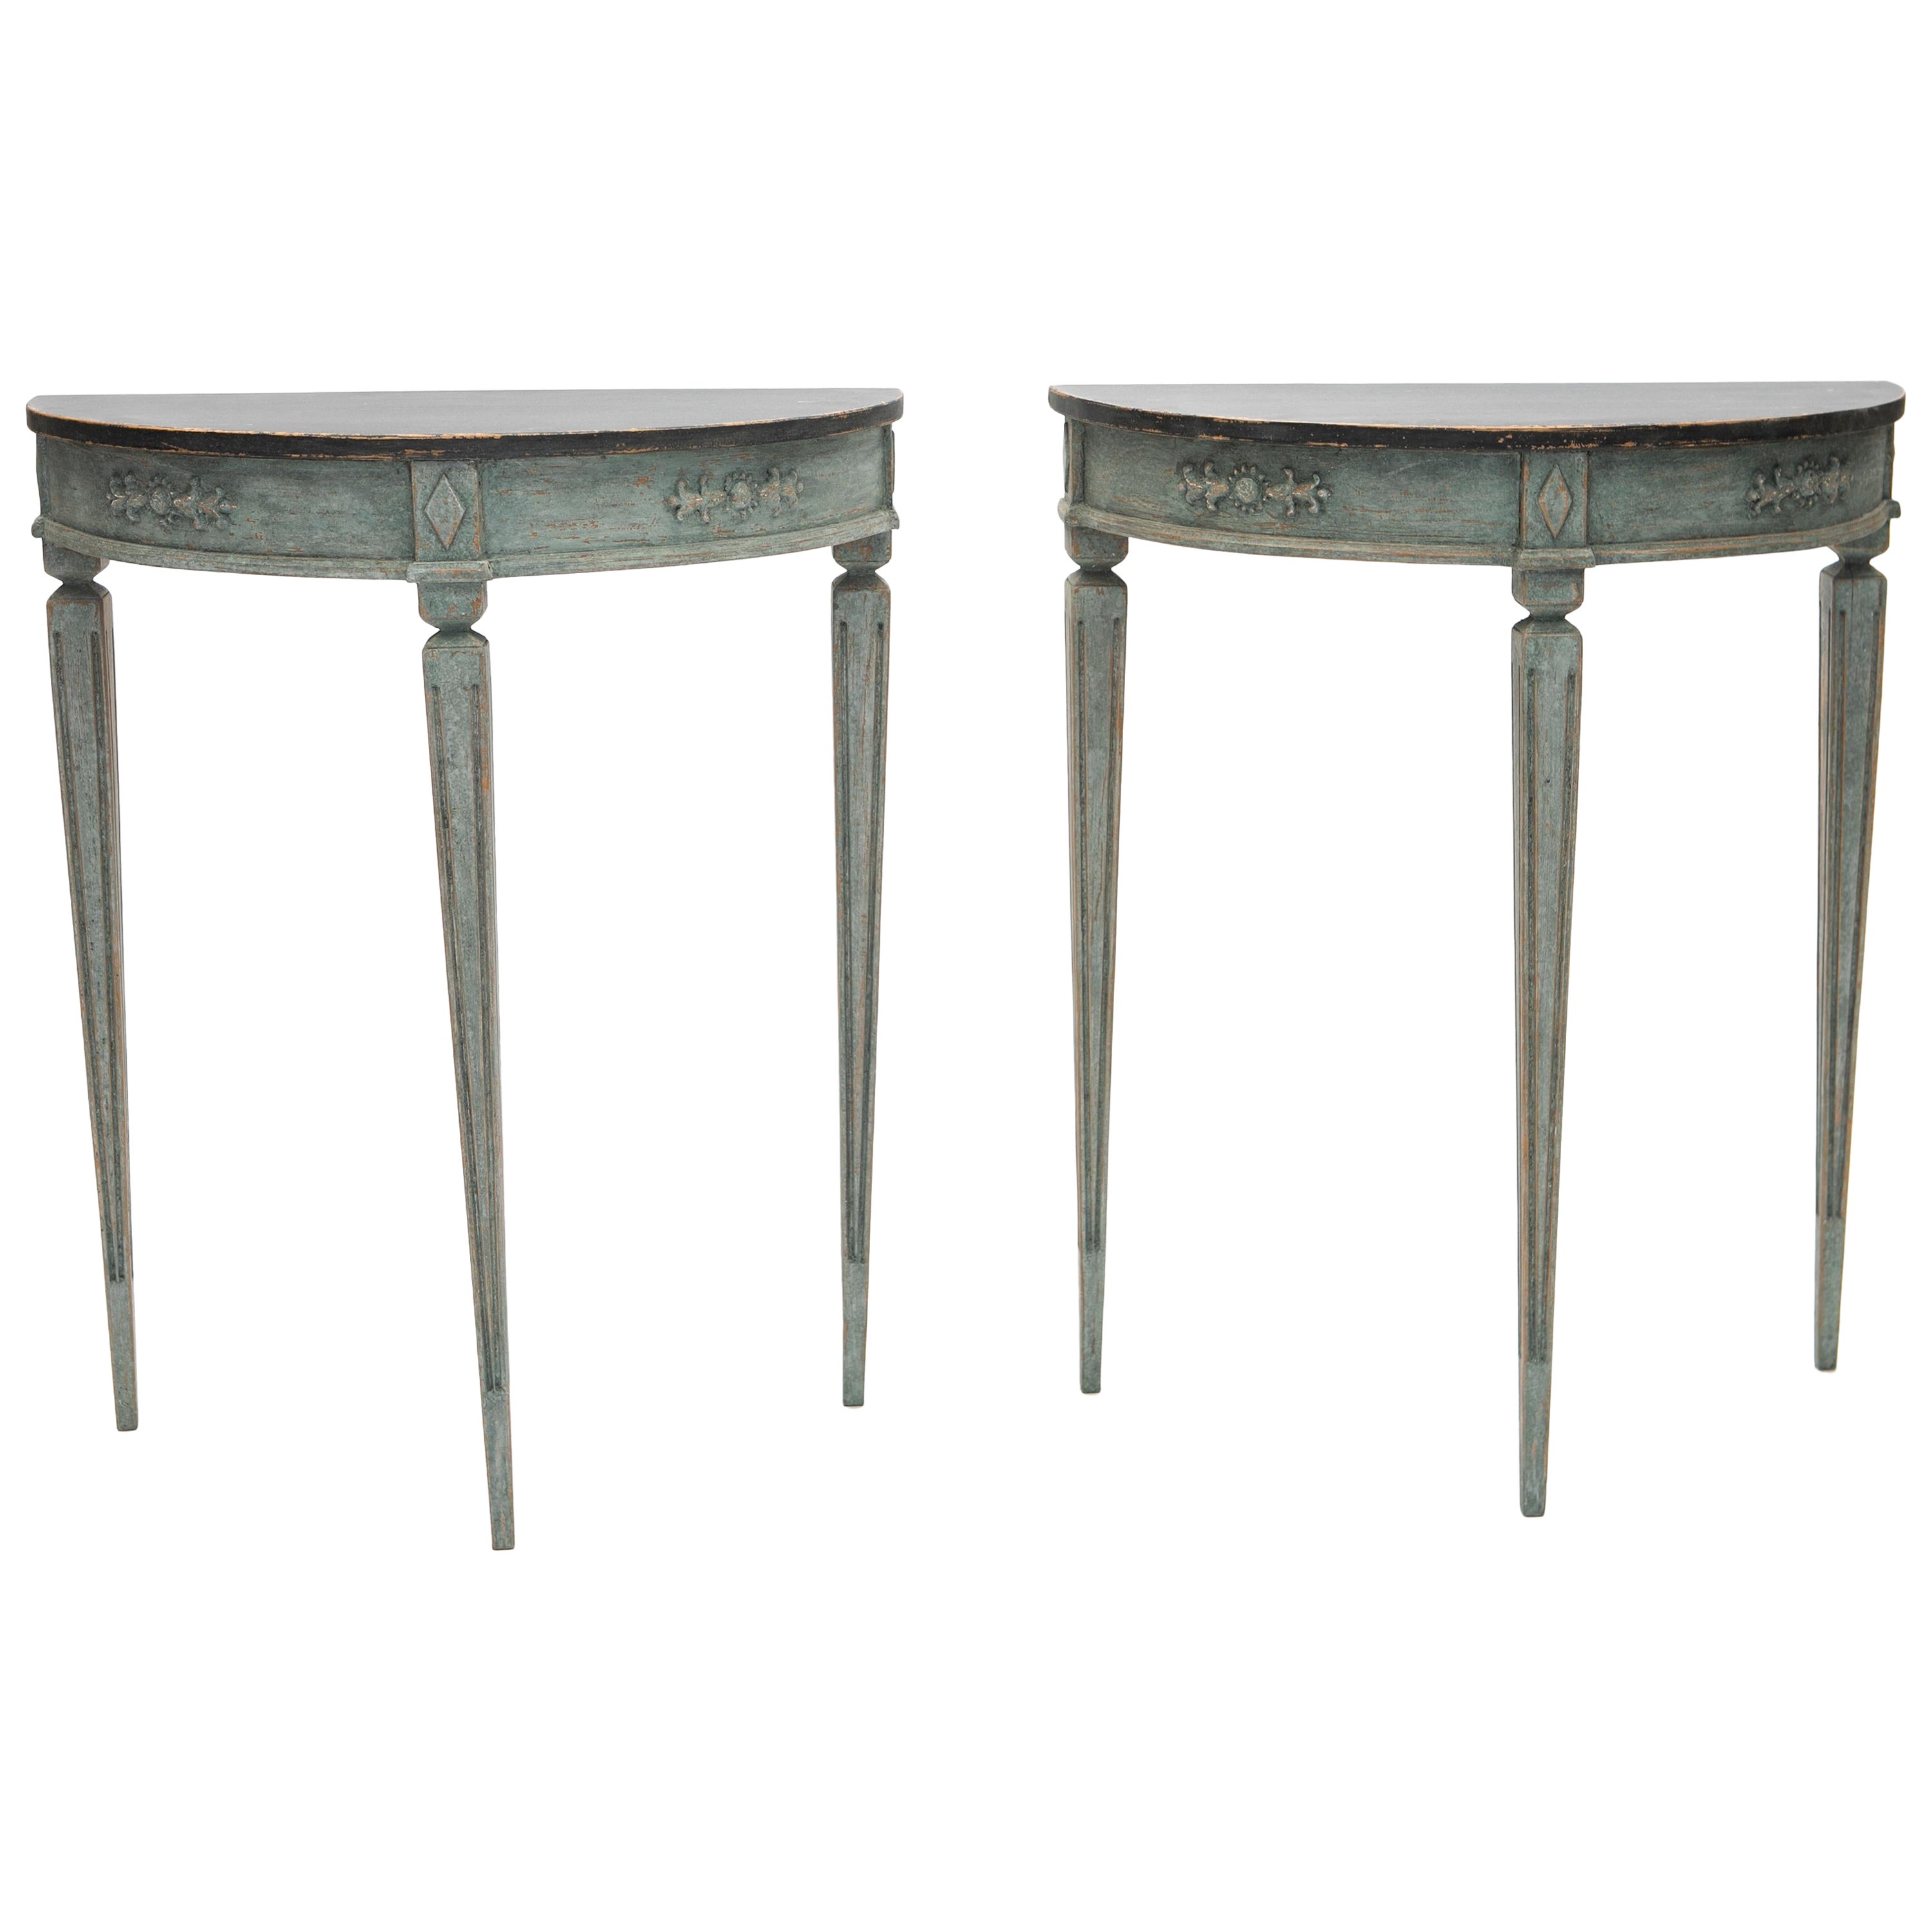 Elegant pair of demilune console tables in Gustavian Style.
Gray marbled table top with edge profile, frame with flower and foliage ornamentation.

Lower part blue painted, tapered legs with flutes.
Sweden approx. 1900.